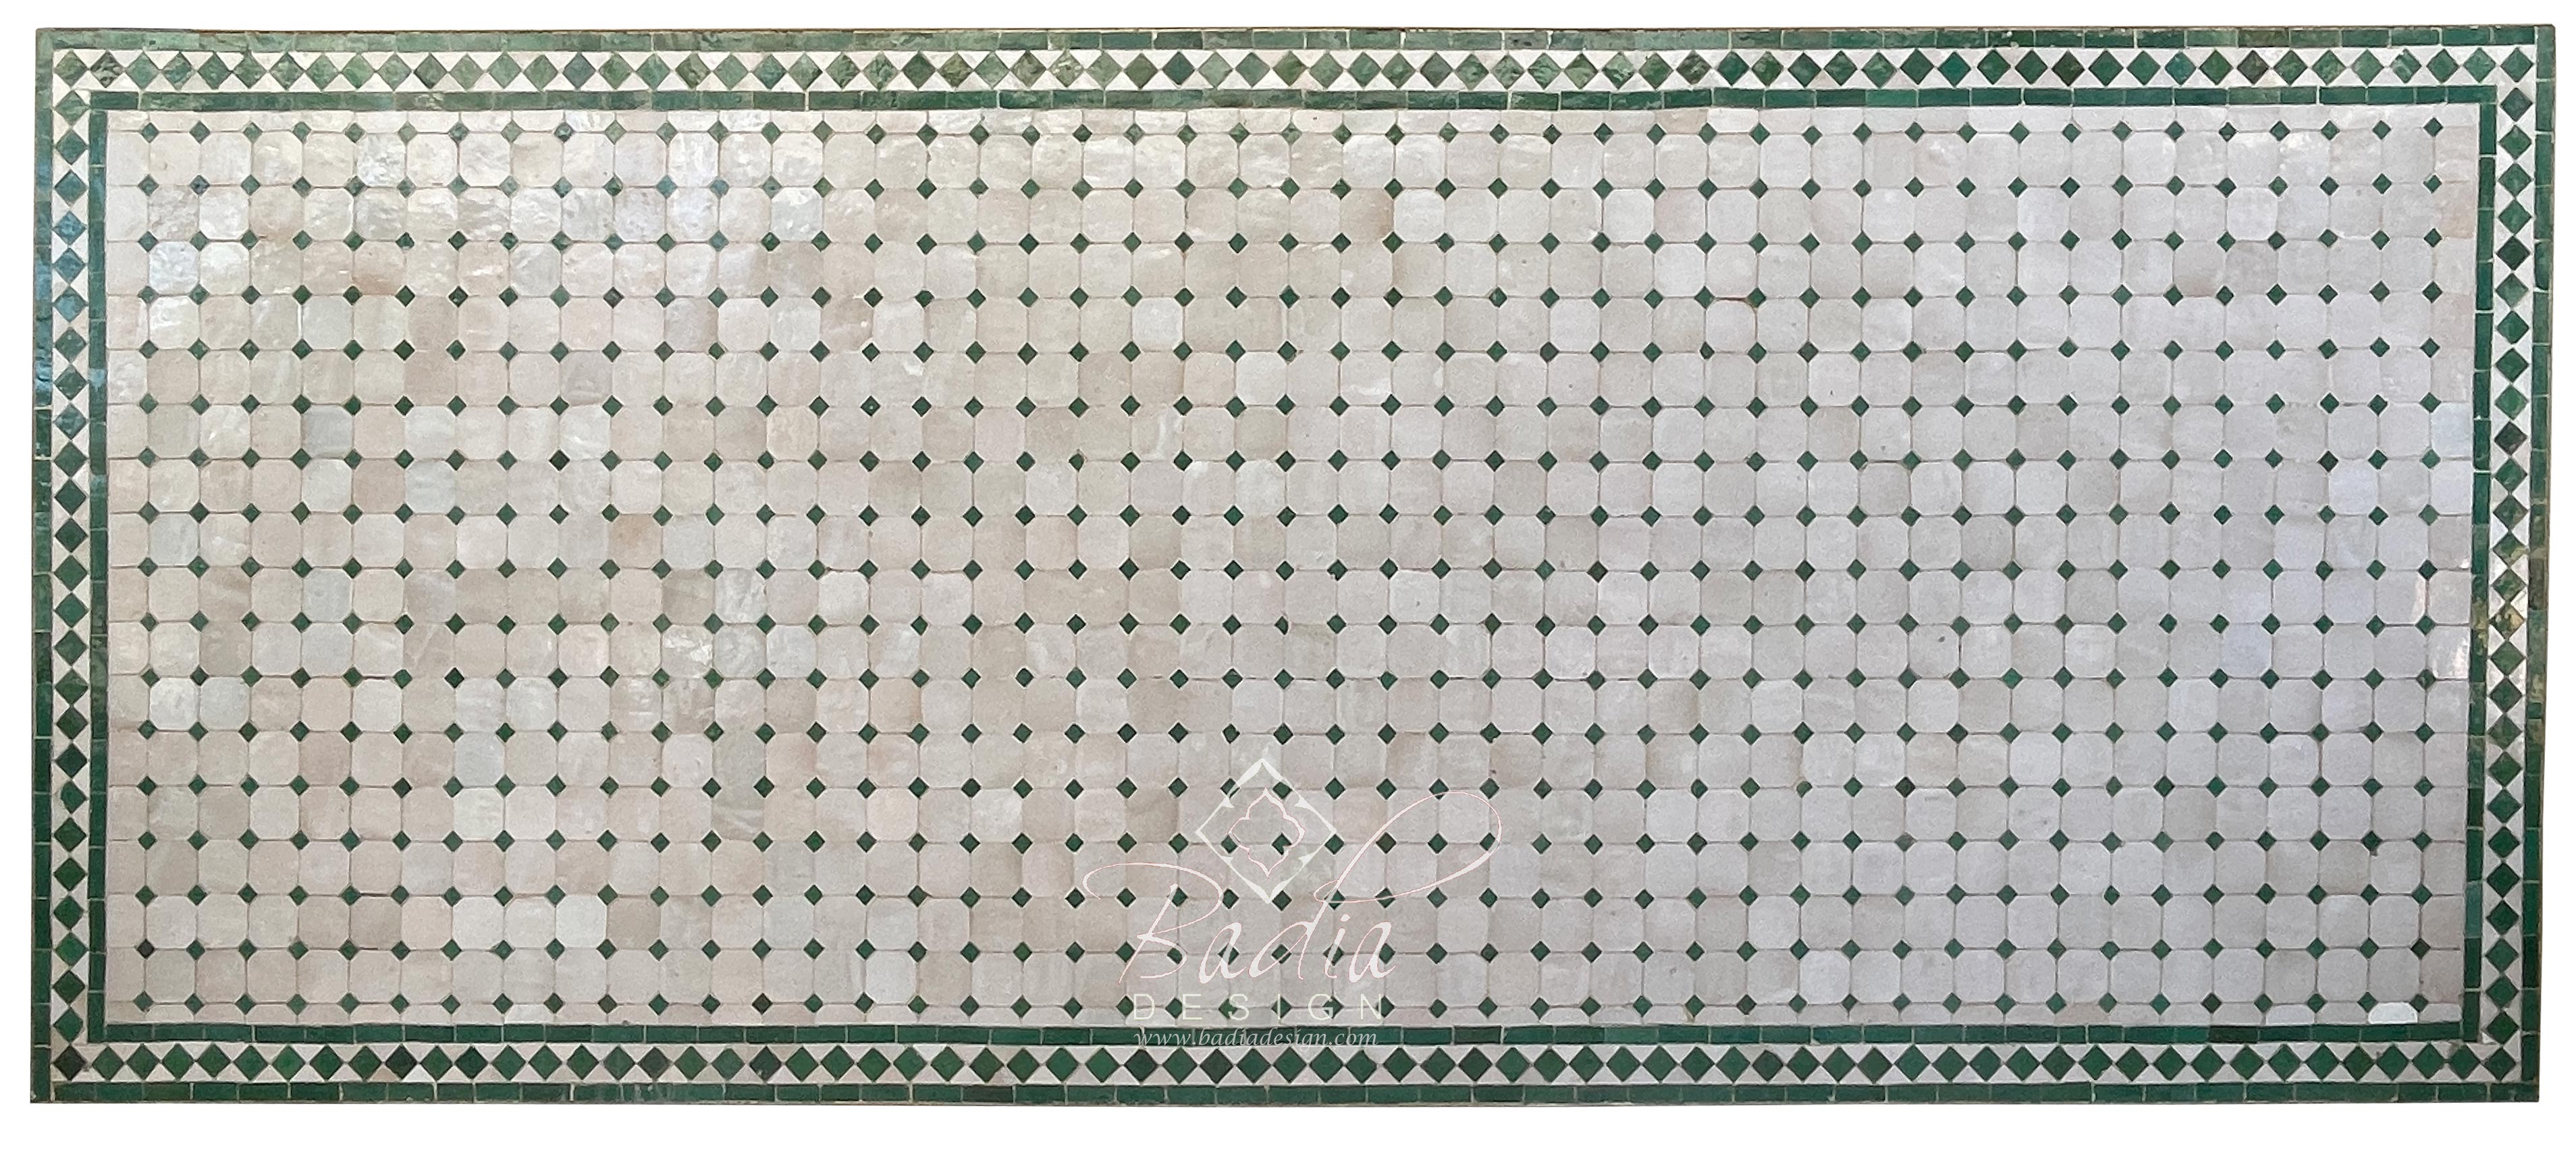 moroccan-green-and-beige-rectangular-shaped-tile-table-top-mt833.jpg